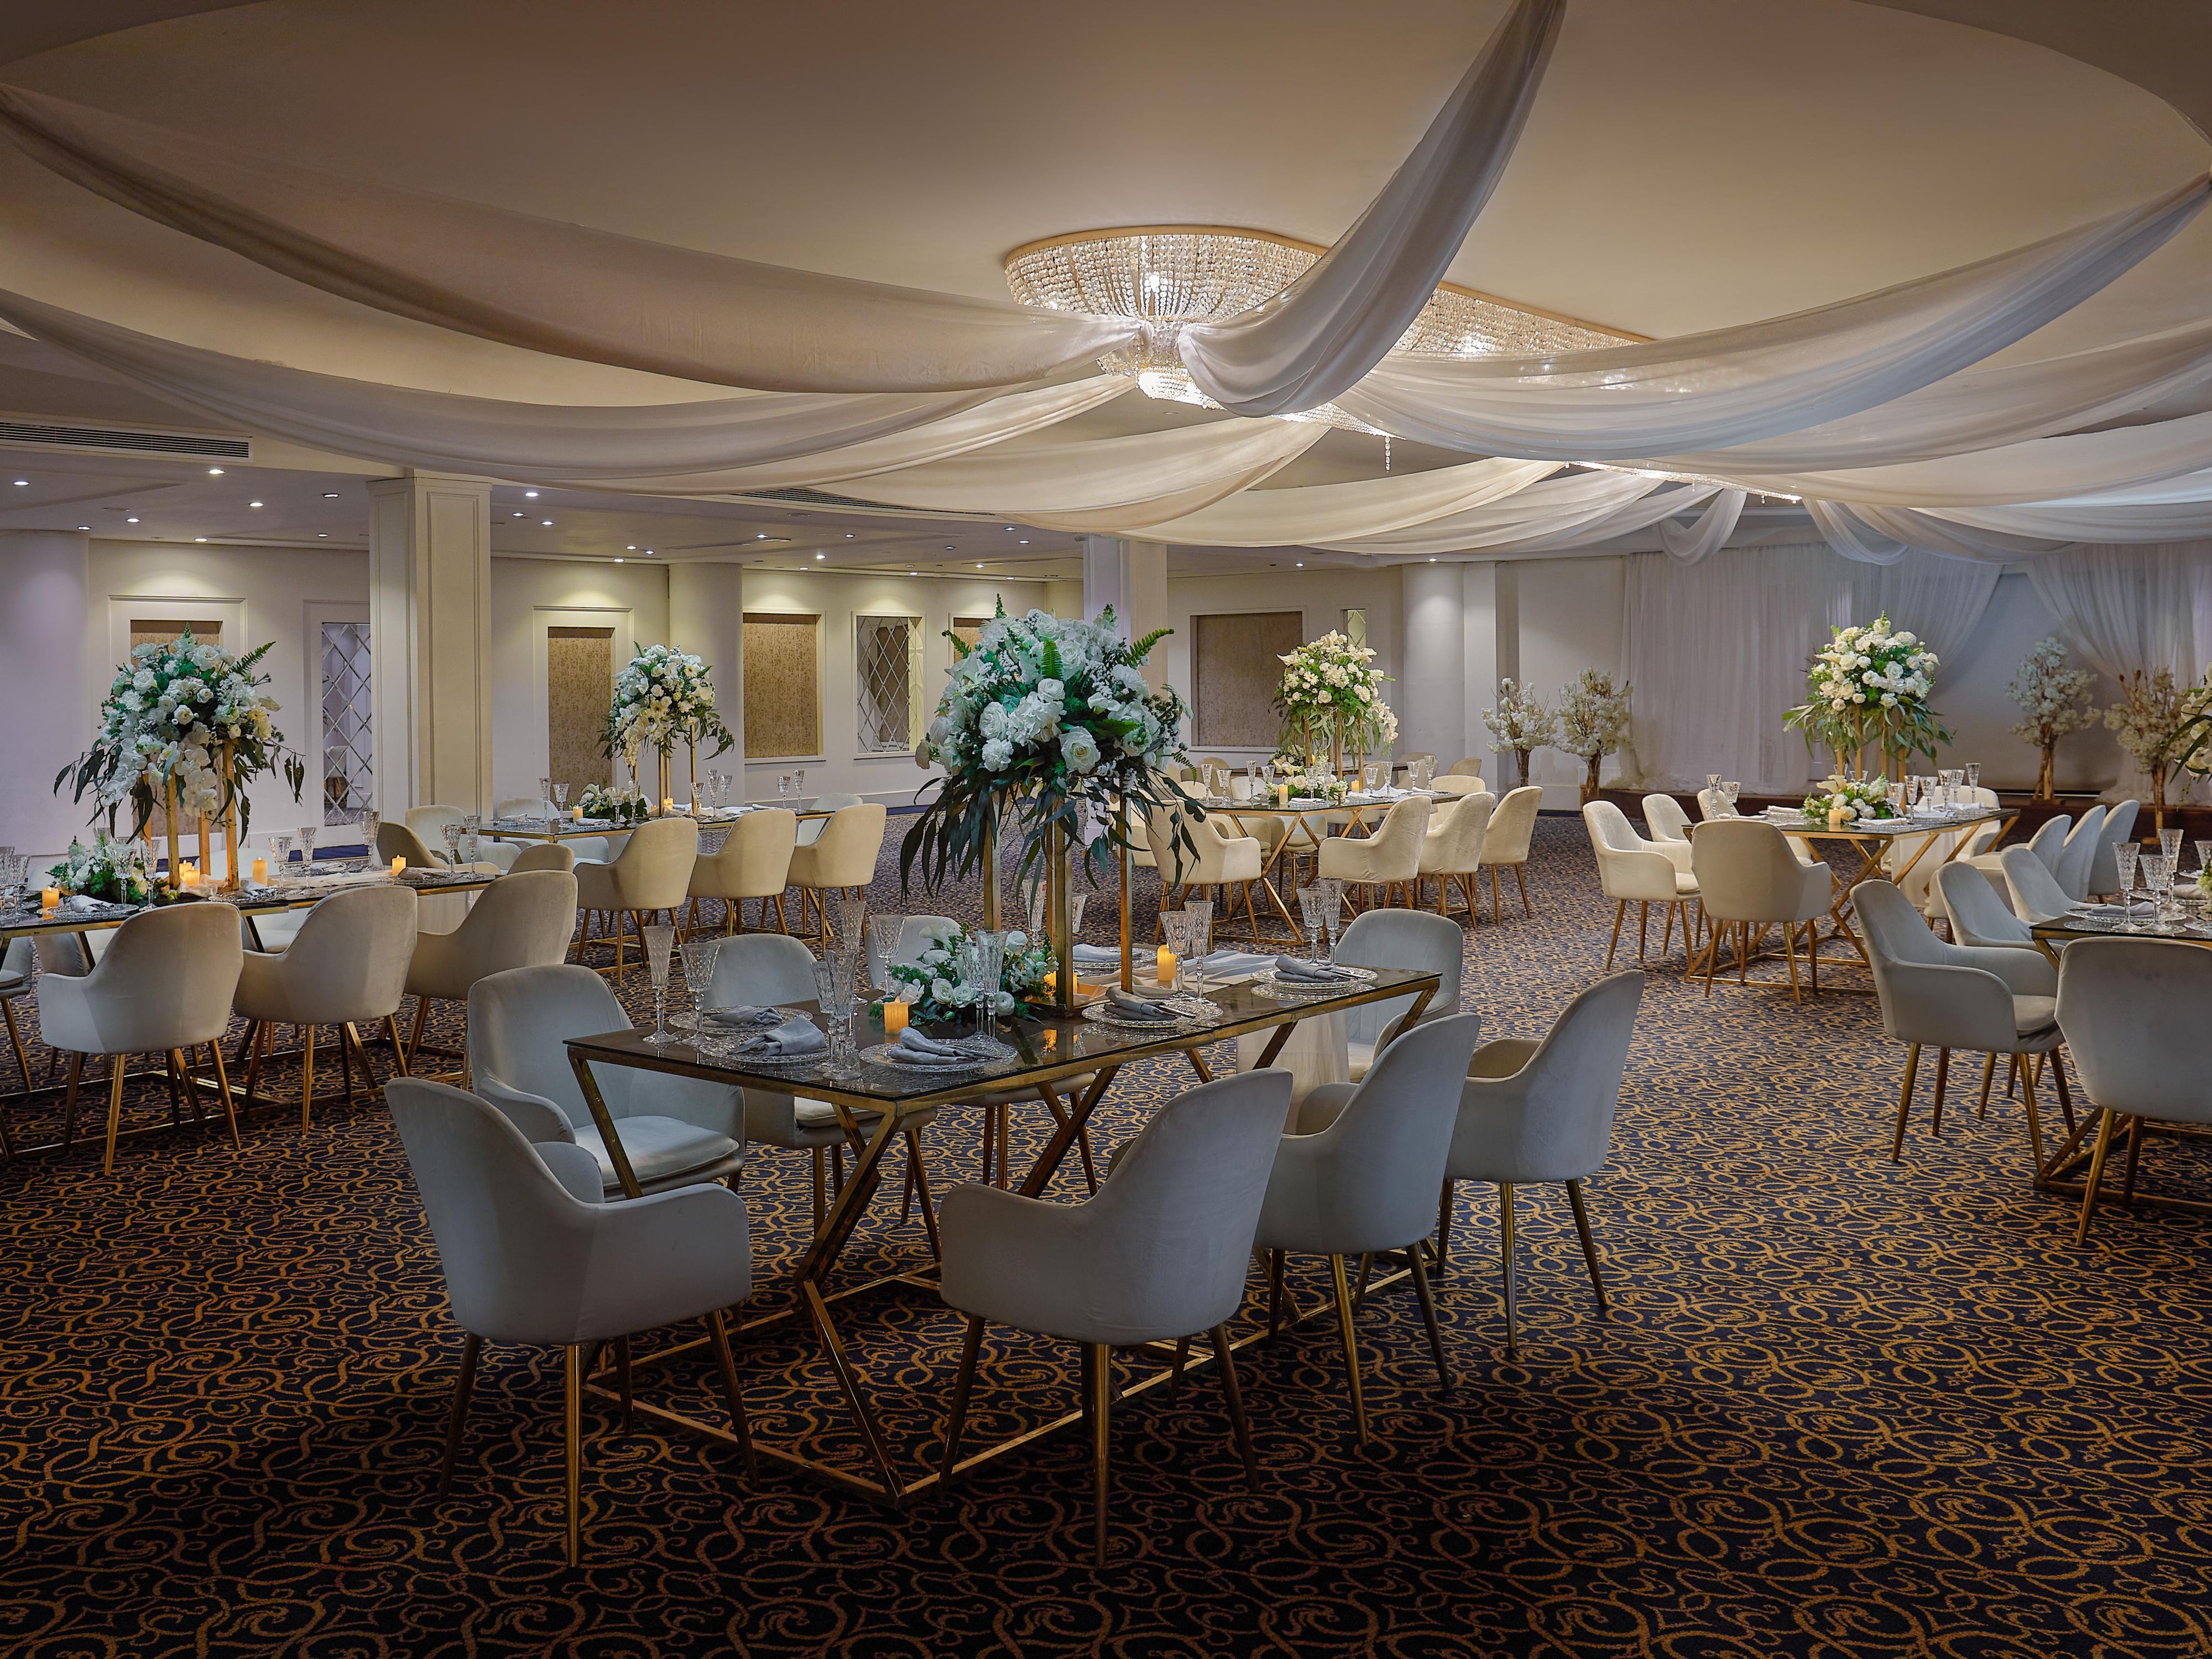 Plan your dream wedding at Holiday Inn Cairo Maadi and check out the special venue that caters all your needs. Our talented experts are delighted to take care of all the details with devotion to make your event as perfect as it should be.

For more details, kindly connect with the banquet team